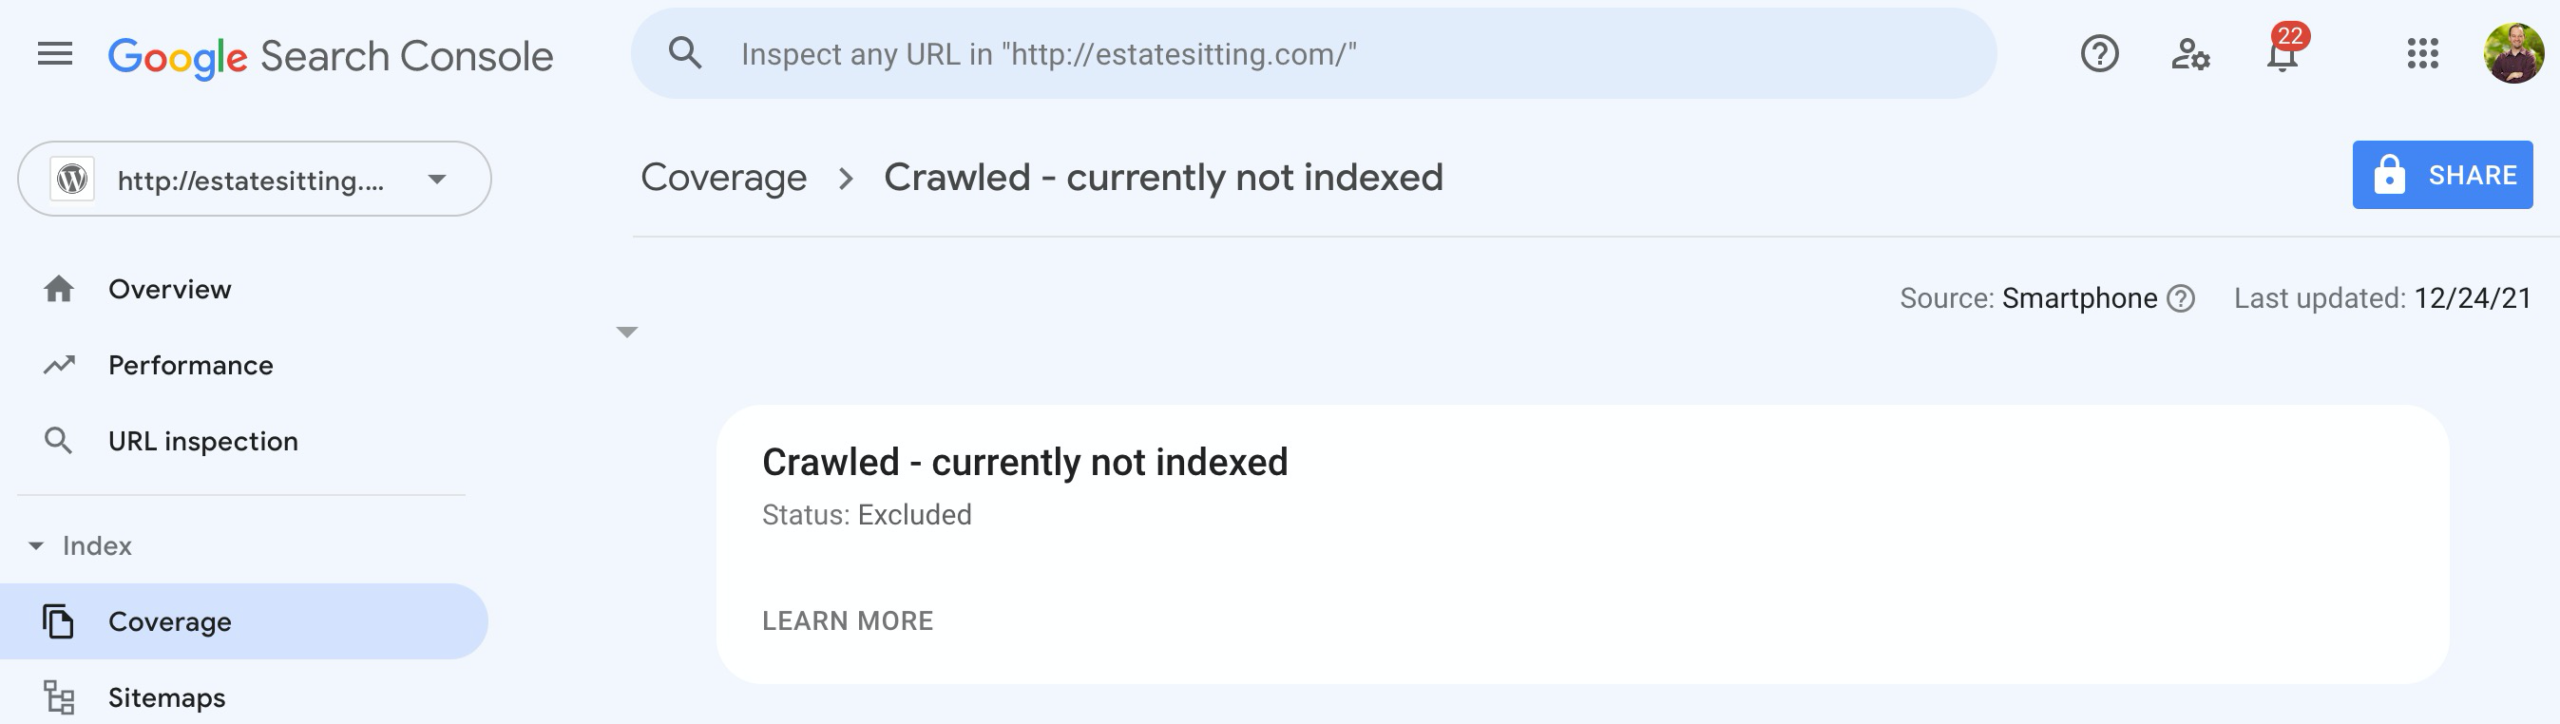 Crawled - currently not indexed issue in Google Search Console